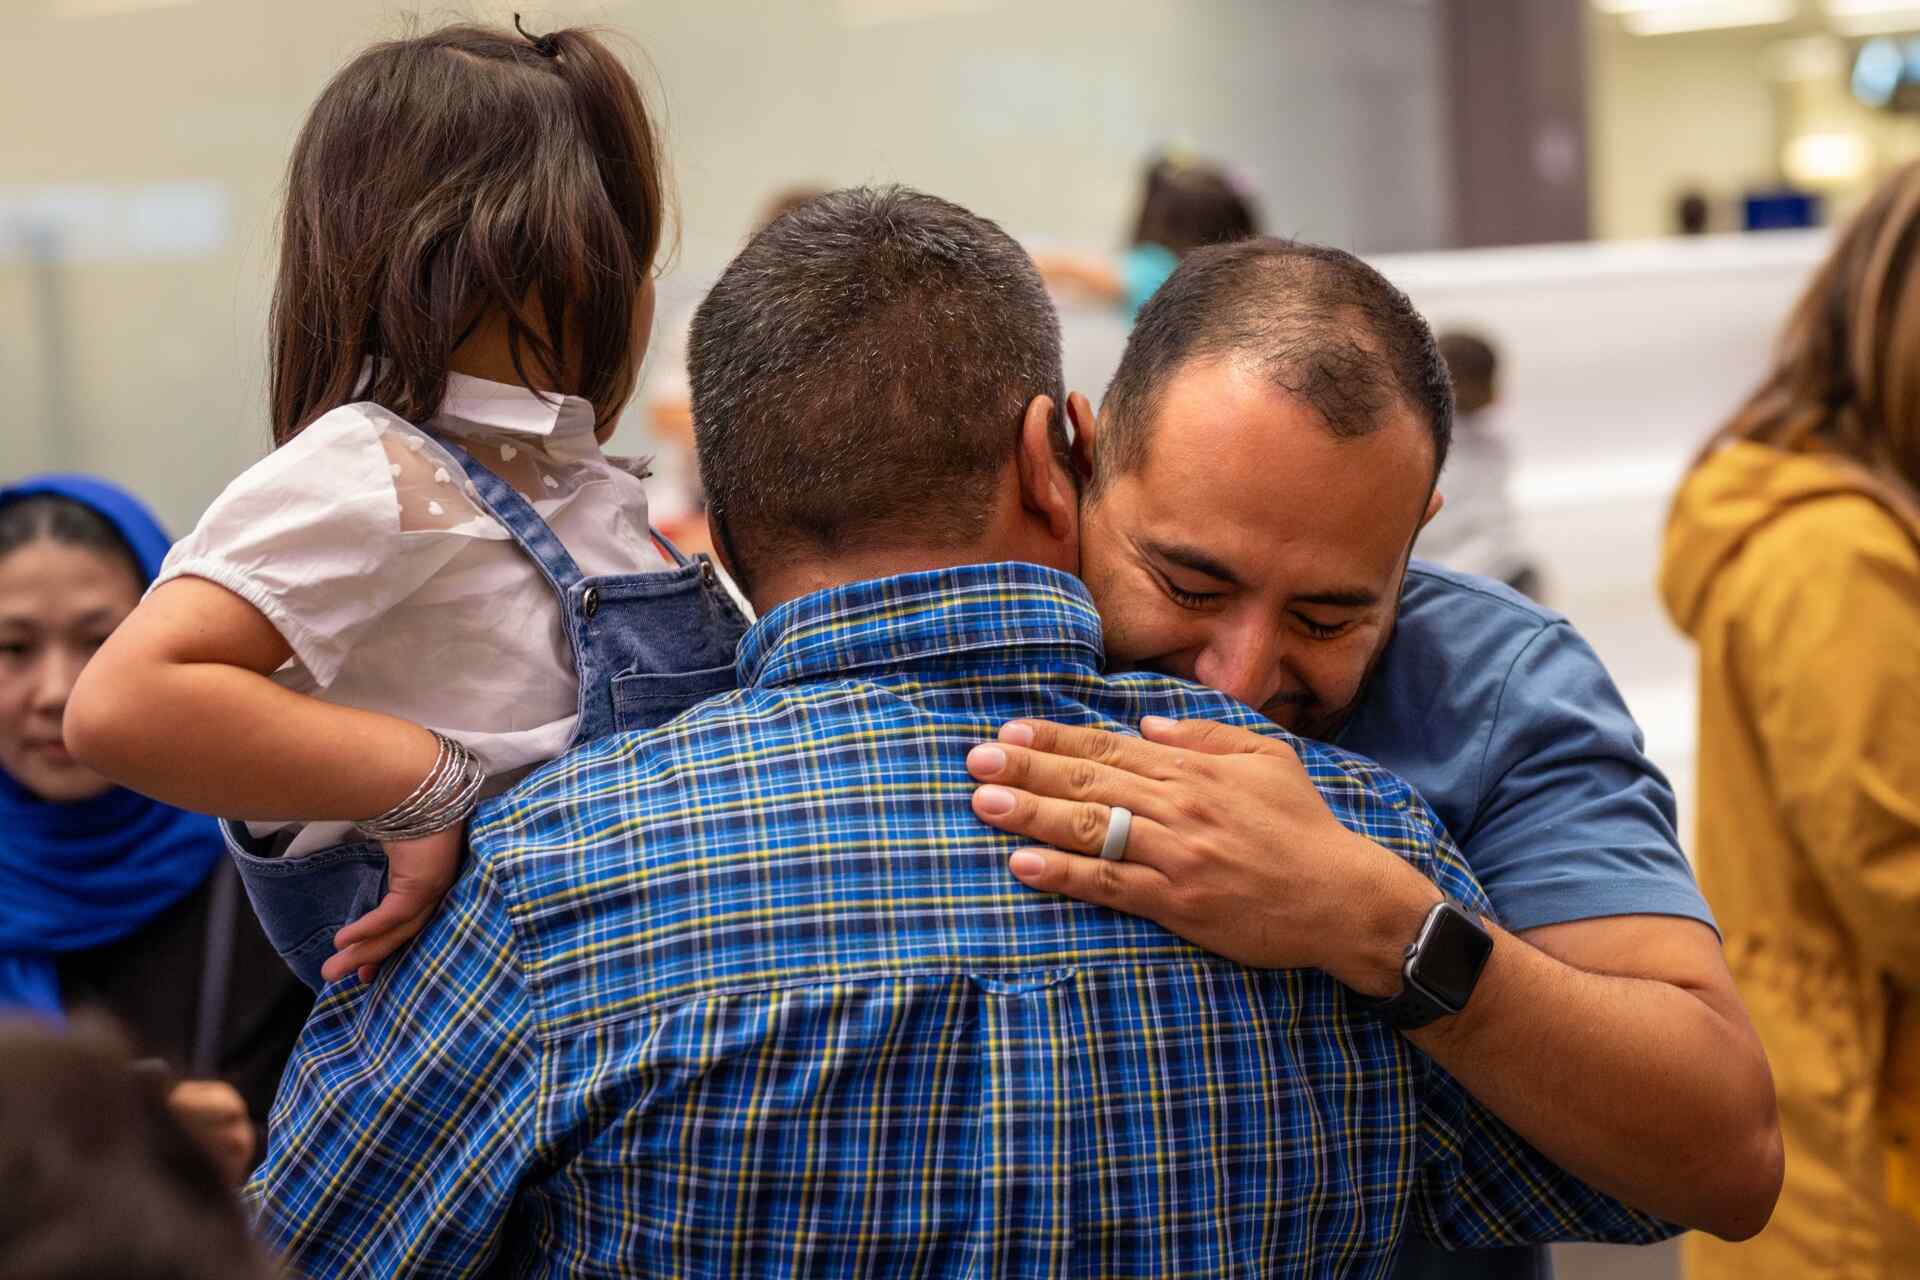 Pedro Moncada, an IRC immigration legal representative, embraces Mr. Husseini after his family was reunited.